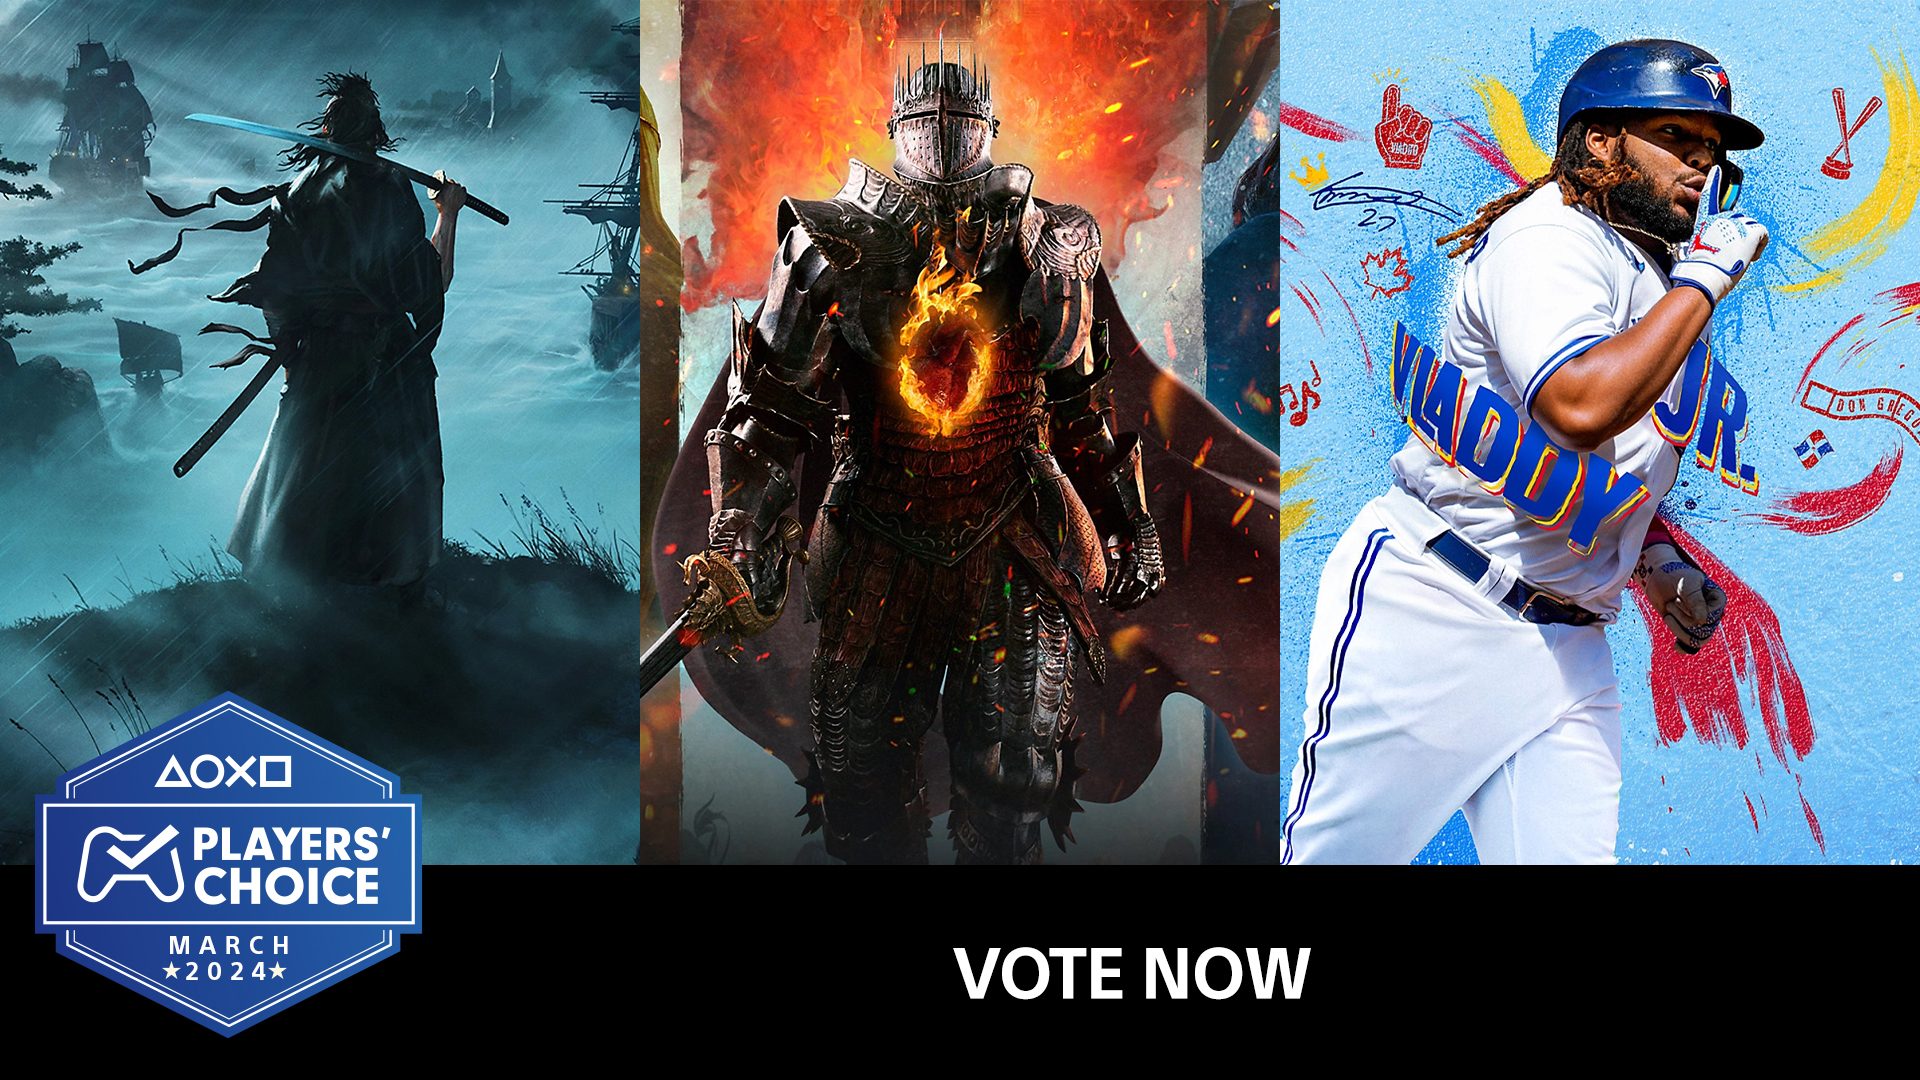 Players’ Choice: Vote for March’s best new game